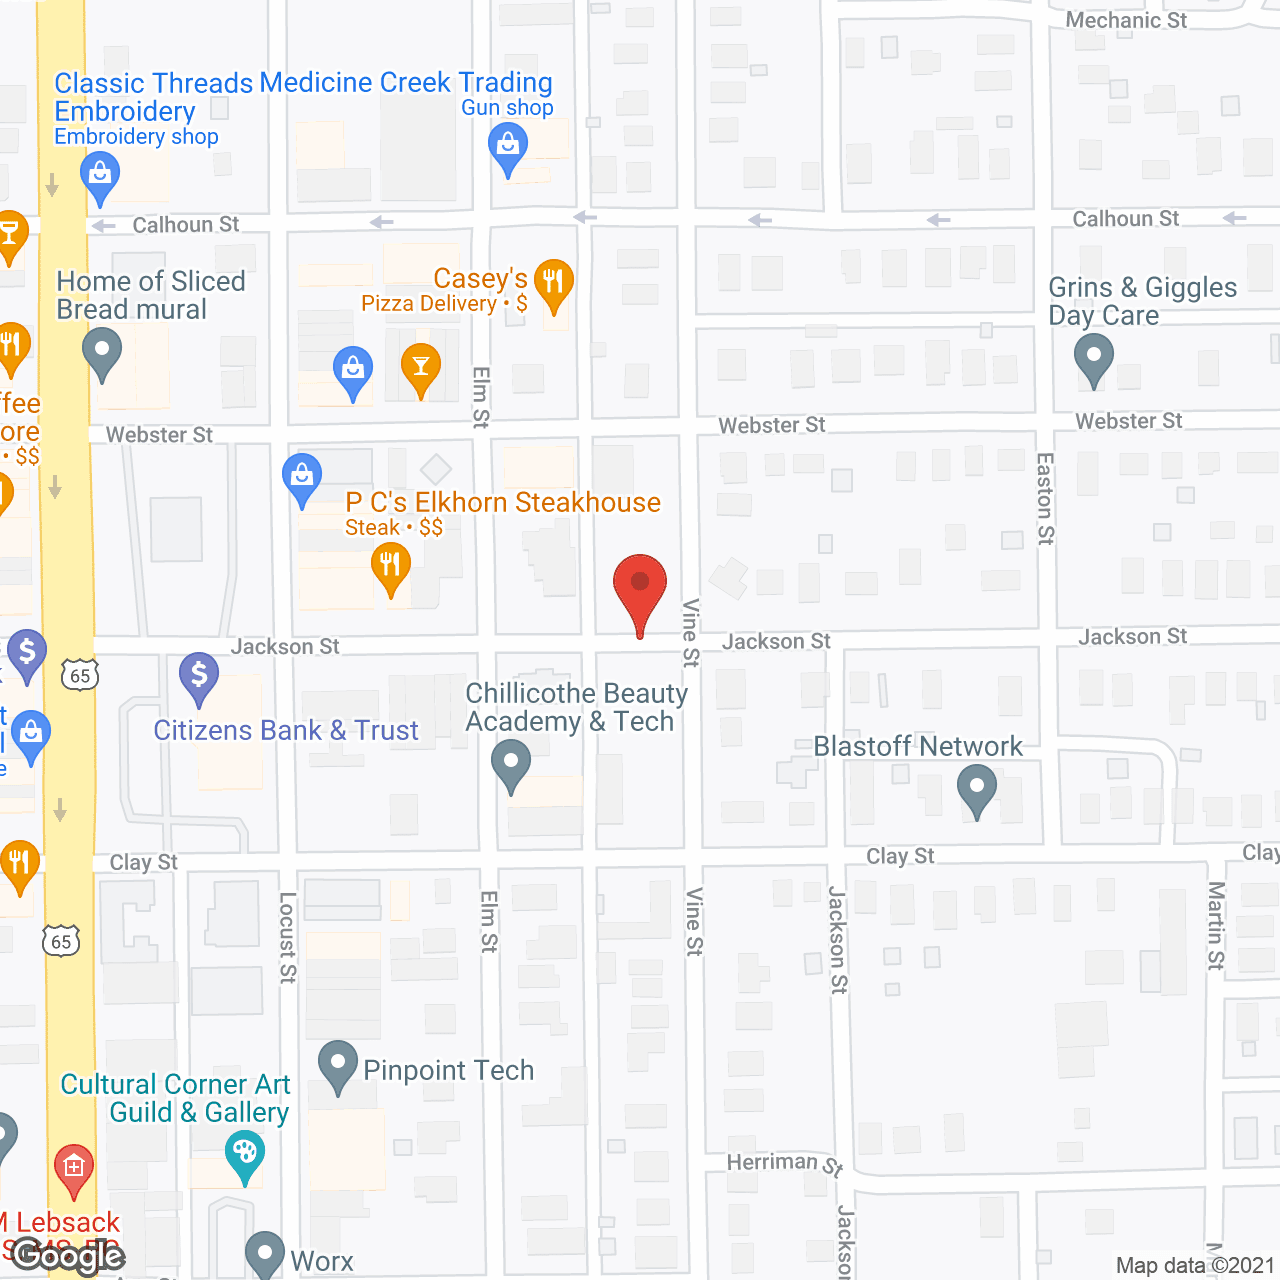 The Center in google map